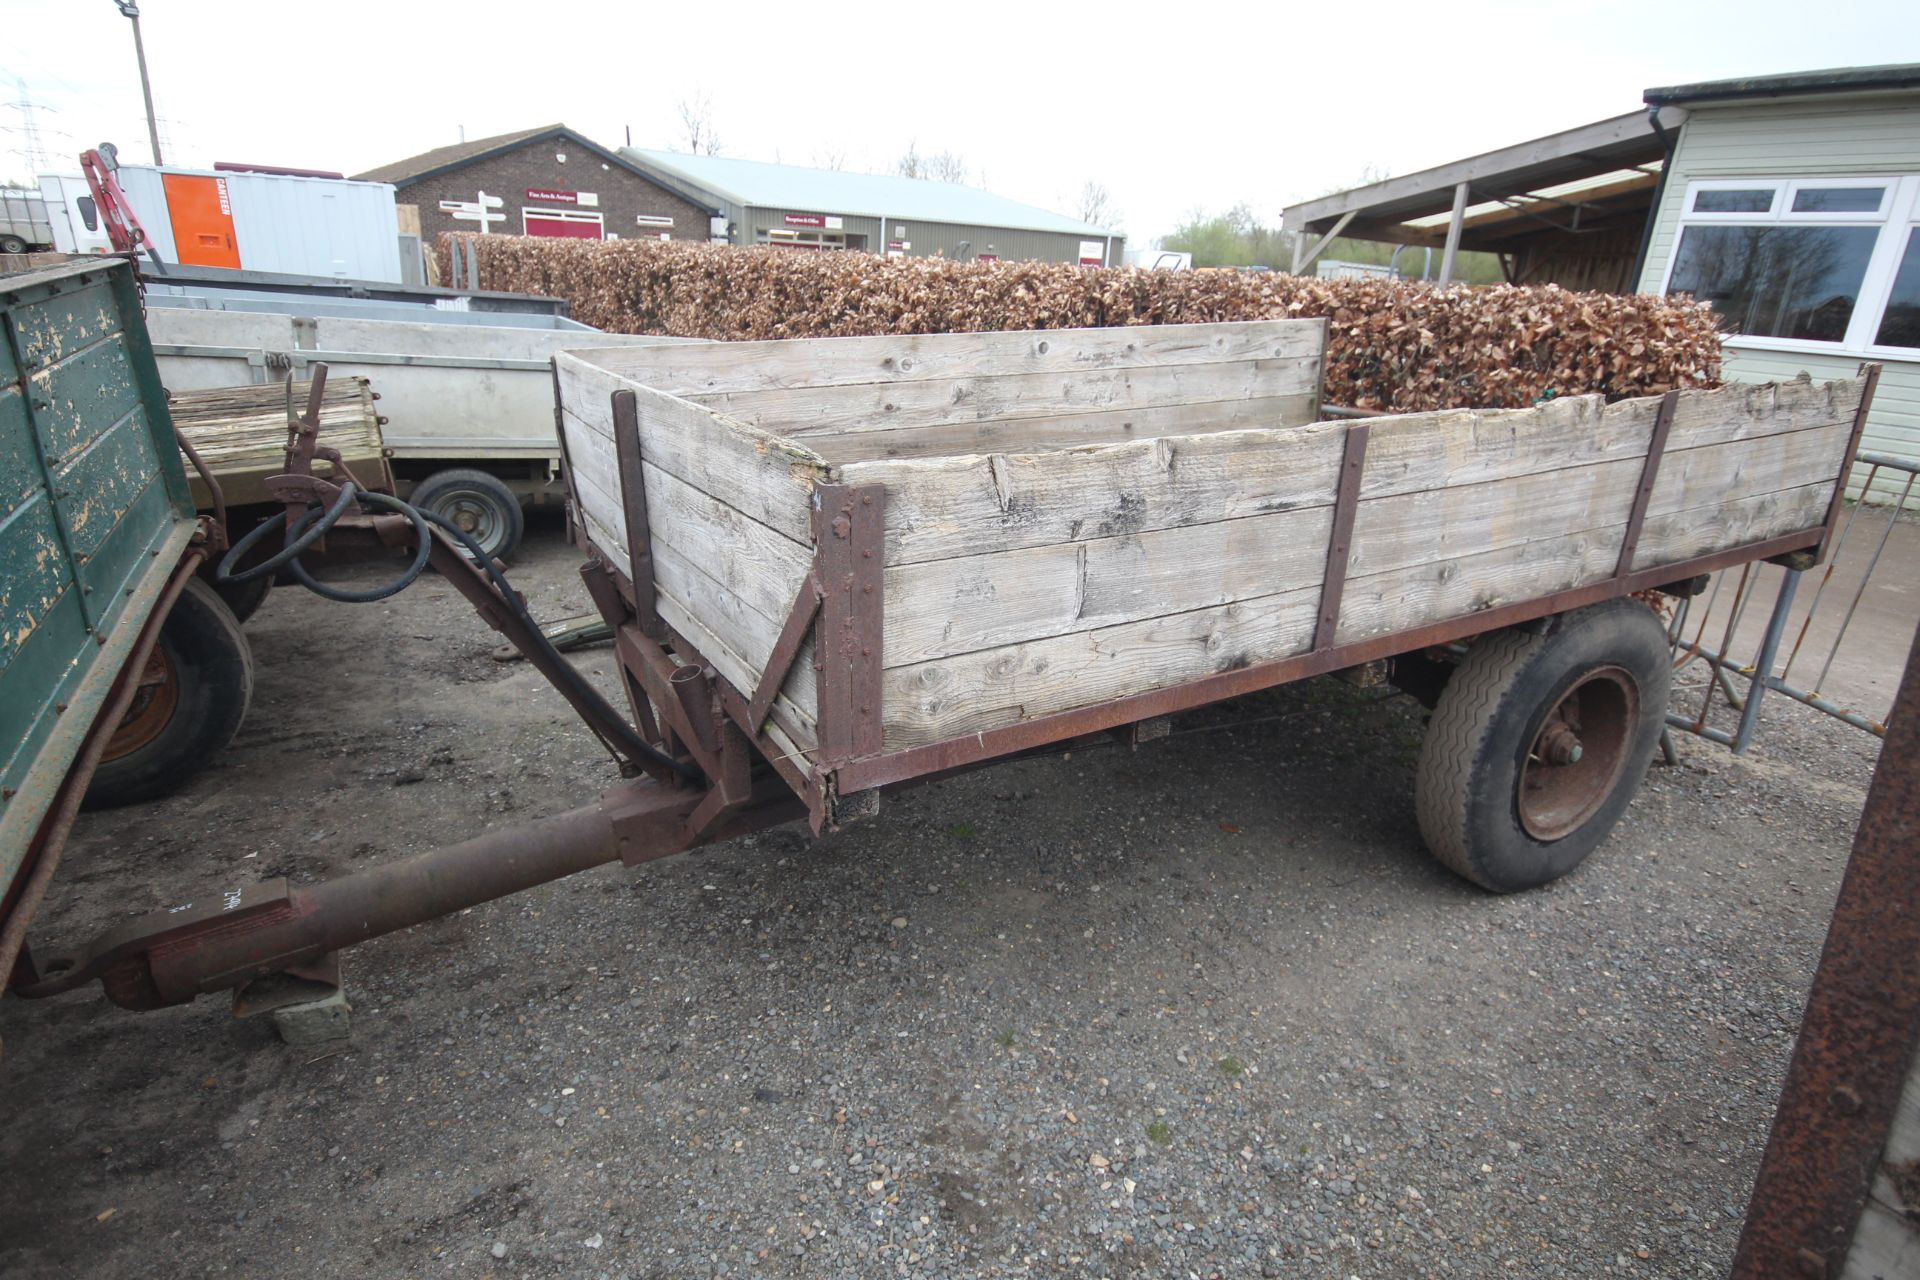 3T single axle tipping trailer. Vendor reports tips well. V